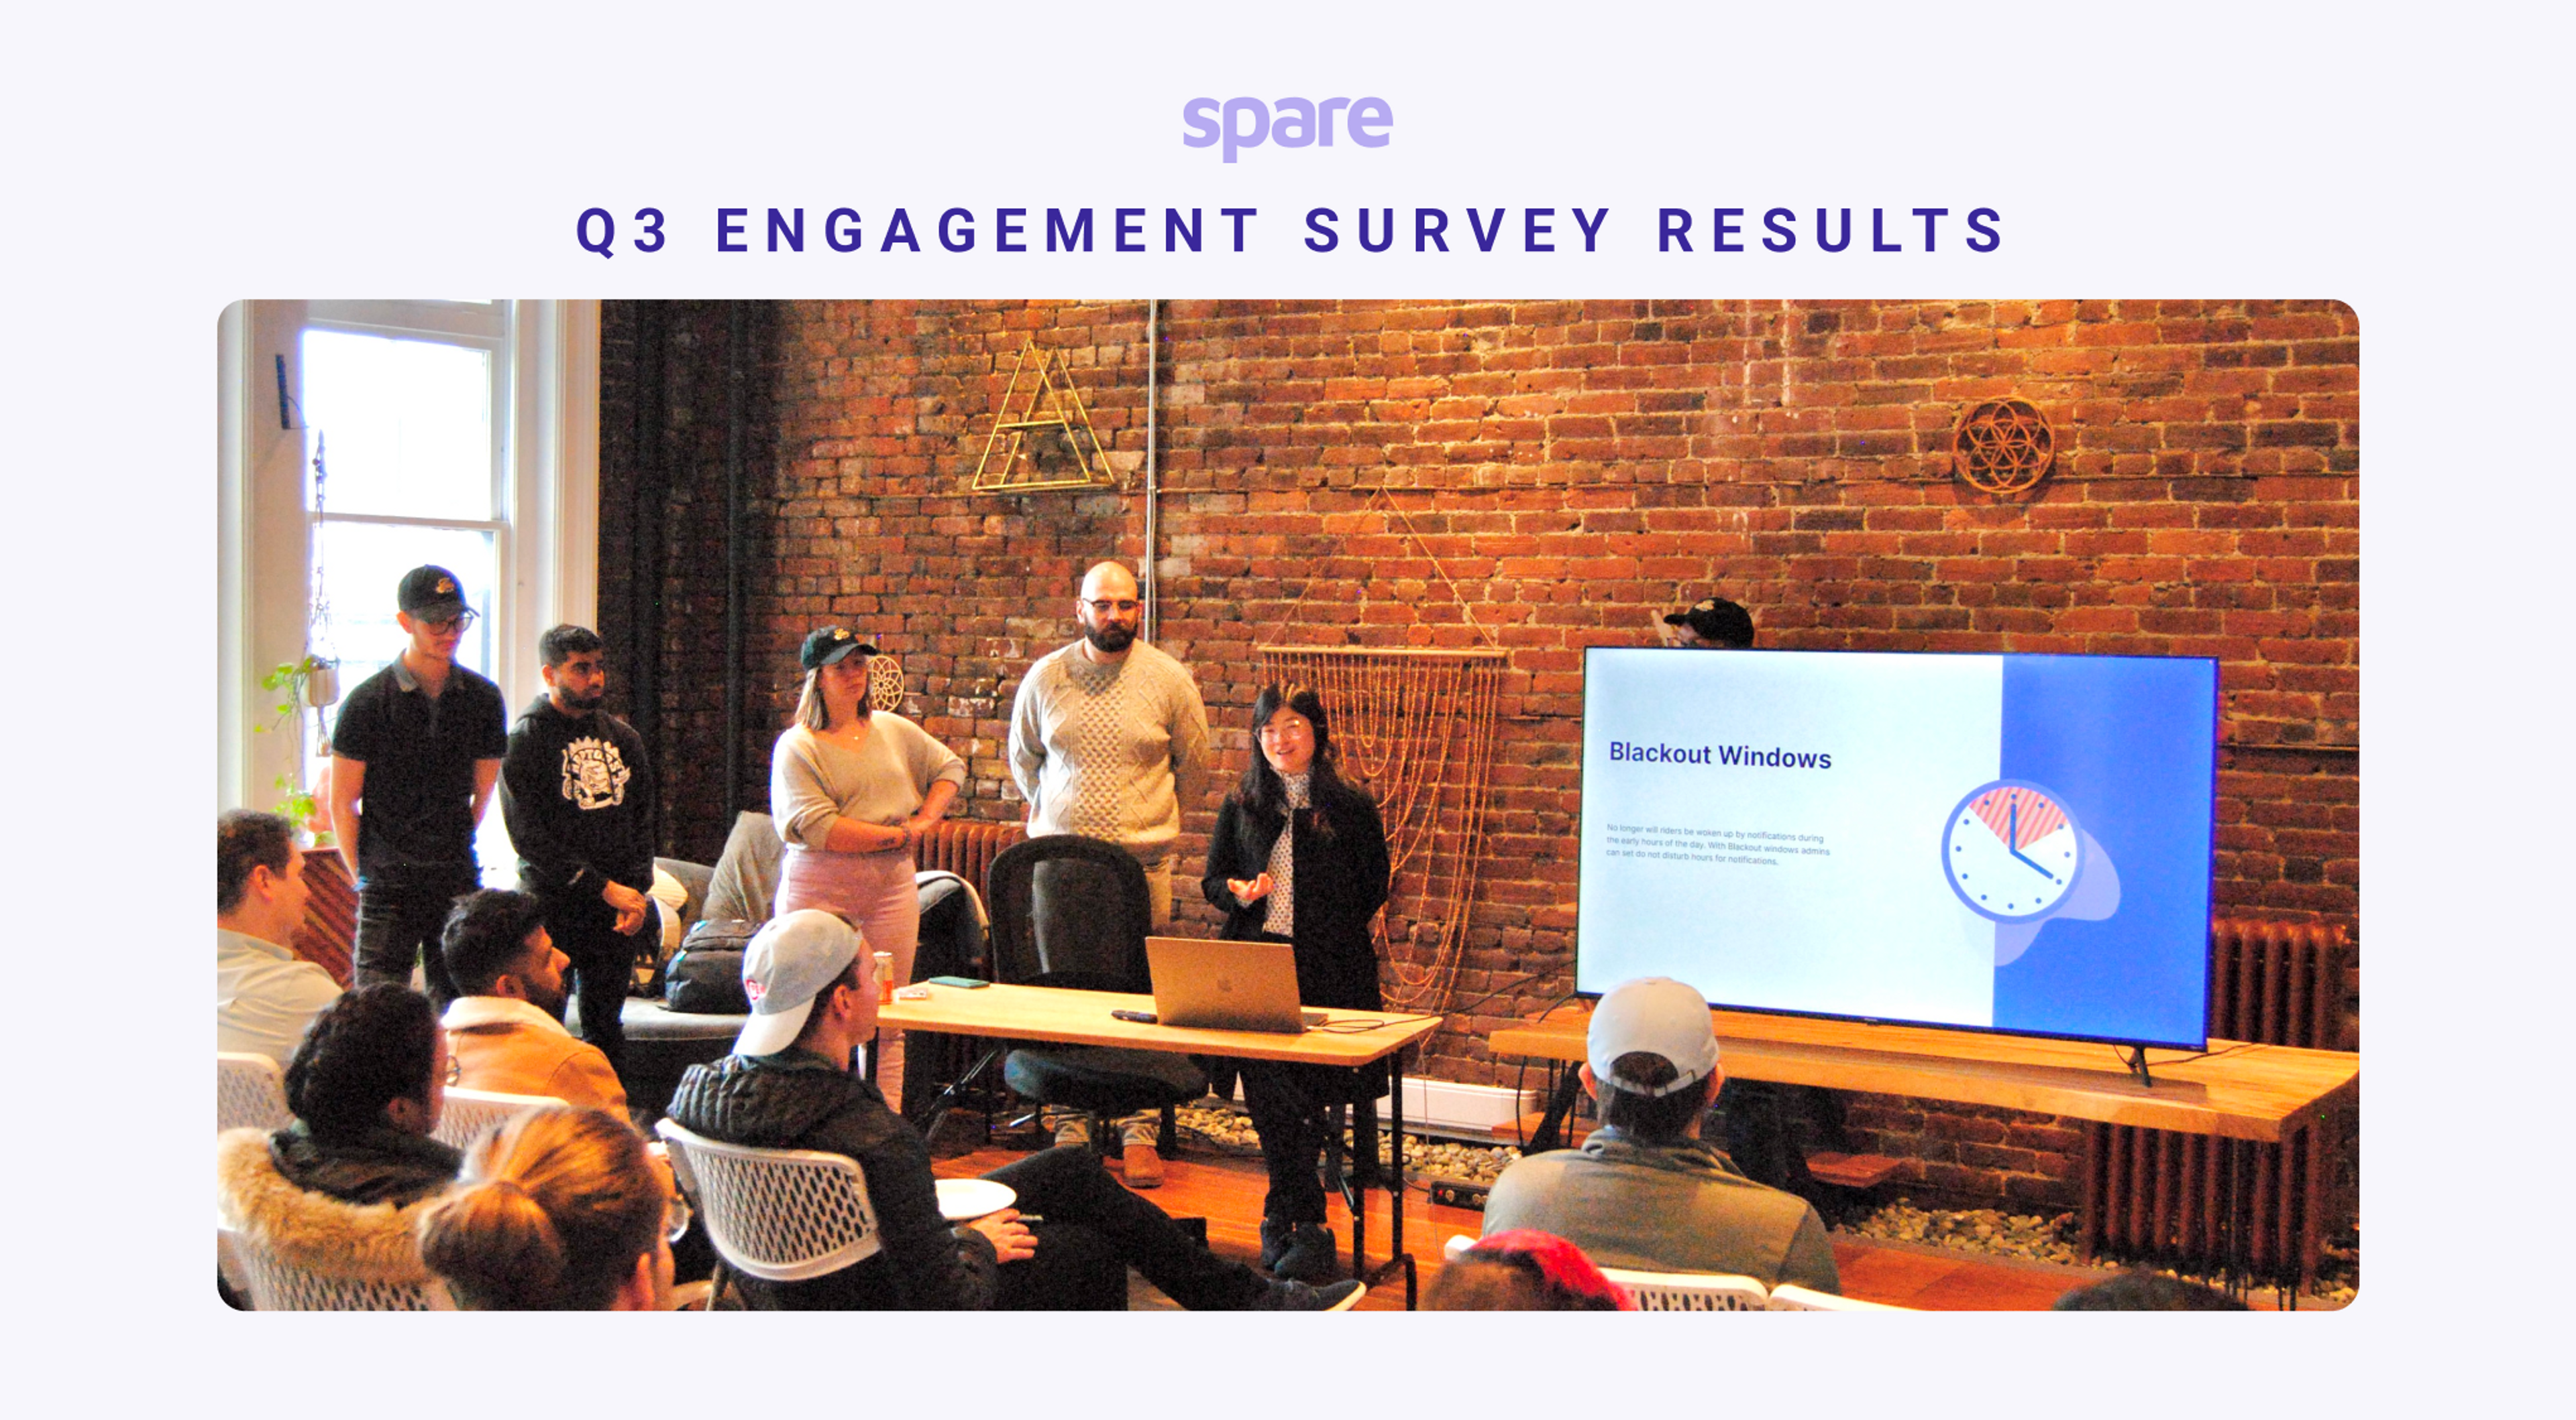 text: Q3 Engagement Survey Results, image: Spare employees giving a presentation